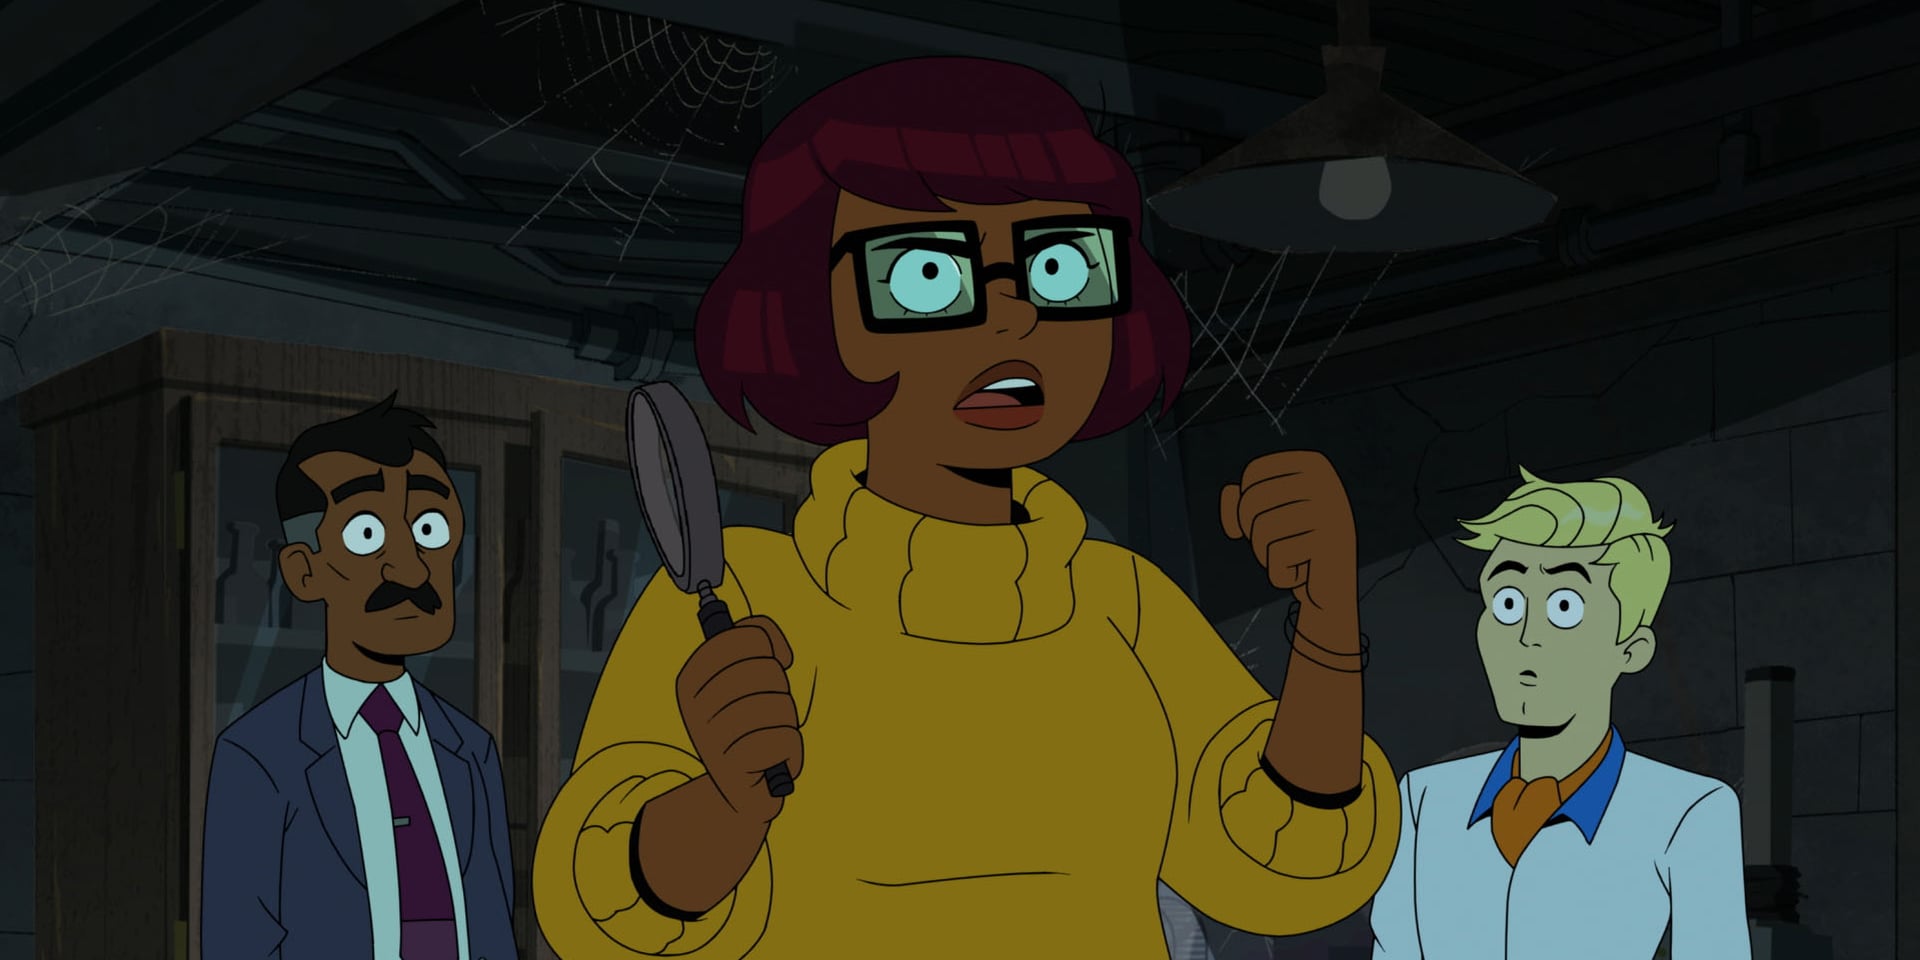 Velma Trailer: Mindy Kaling Voices The Scooby-Doo Character In A